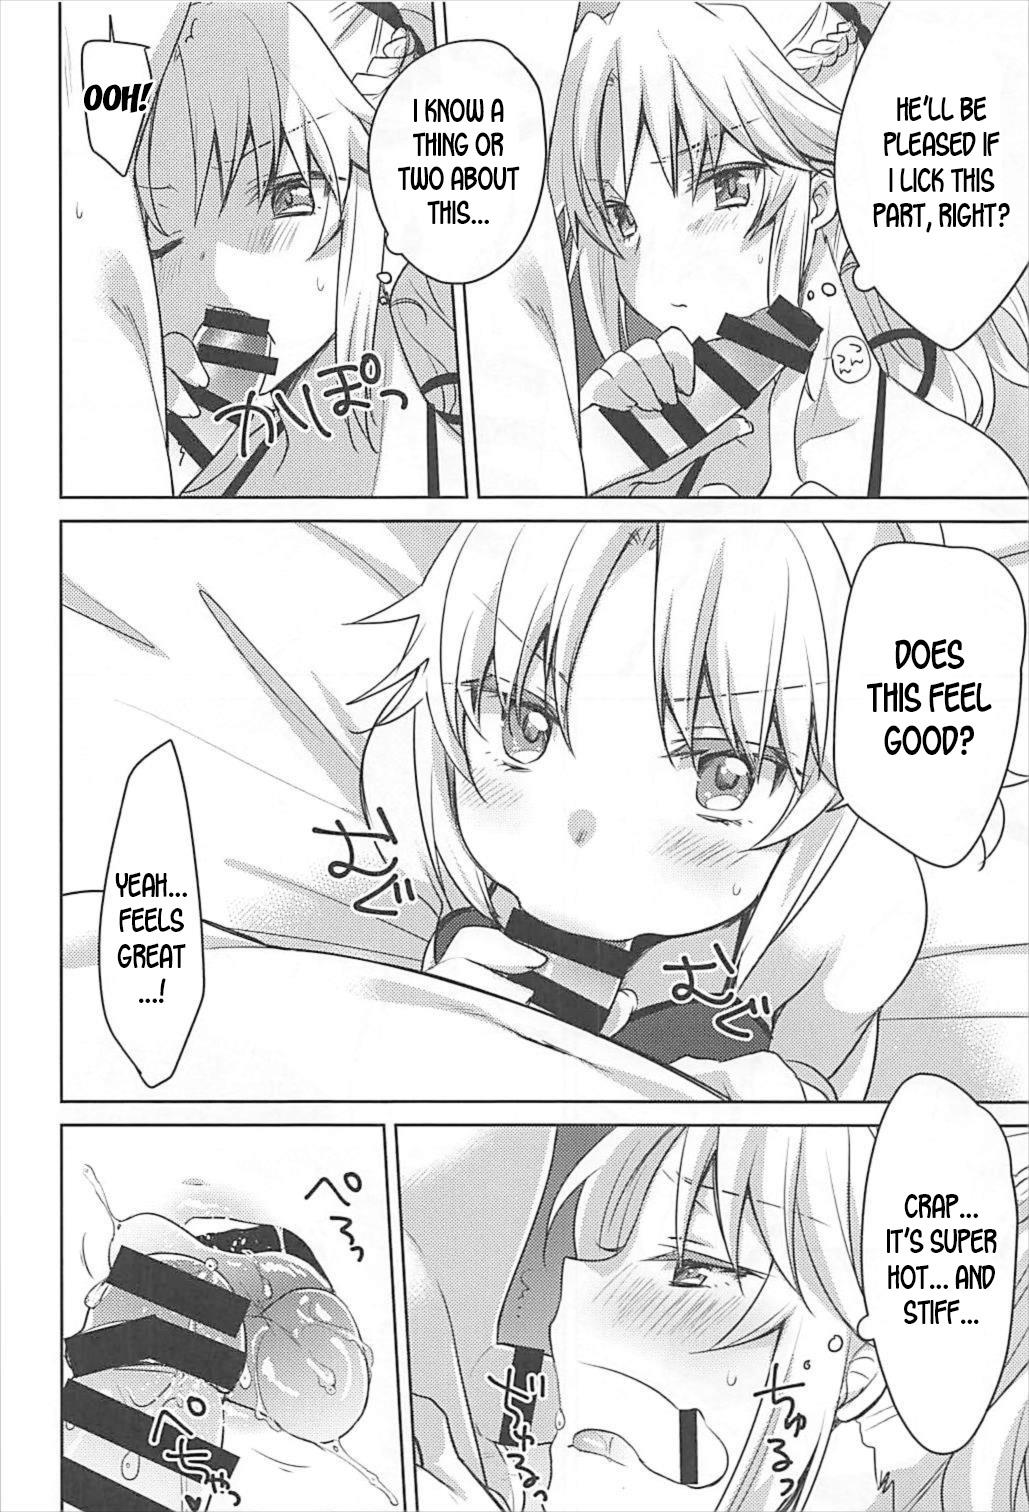 Booty bones - Fate grand order Pawg - Page 7